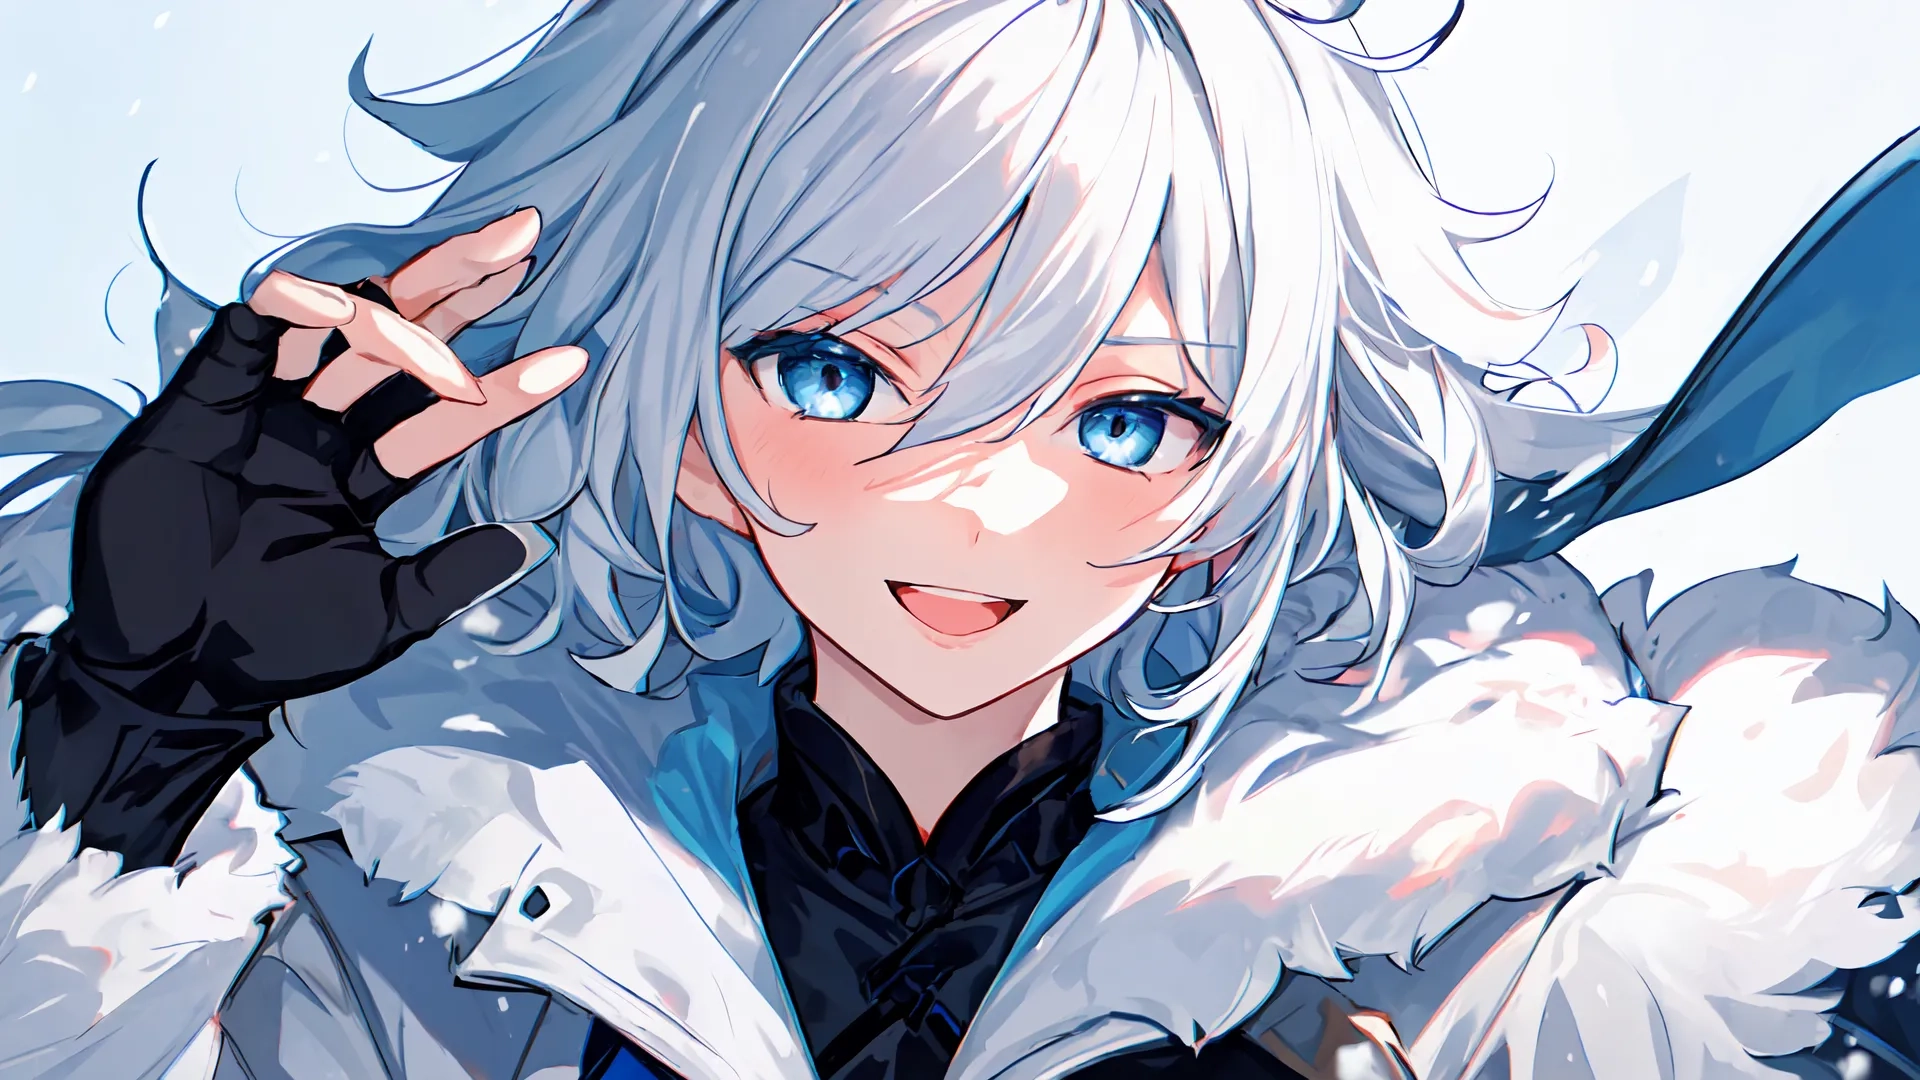 a anime character wearing a beautiful hat and fur coat with white hair and blue eyes looking at the side, holding an object in his hand and pointing
